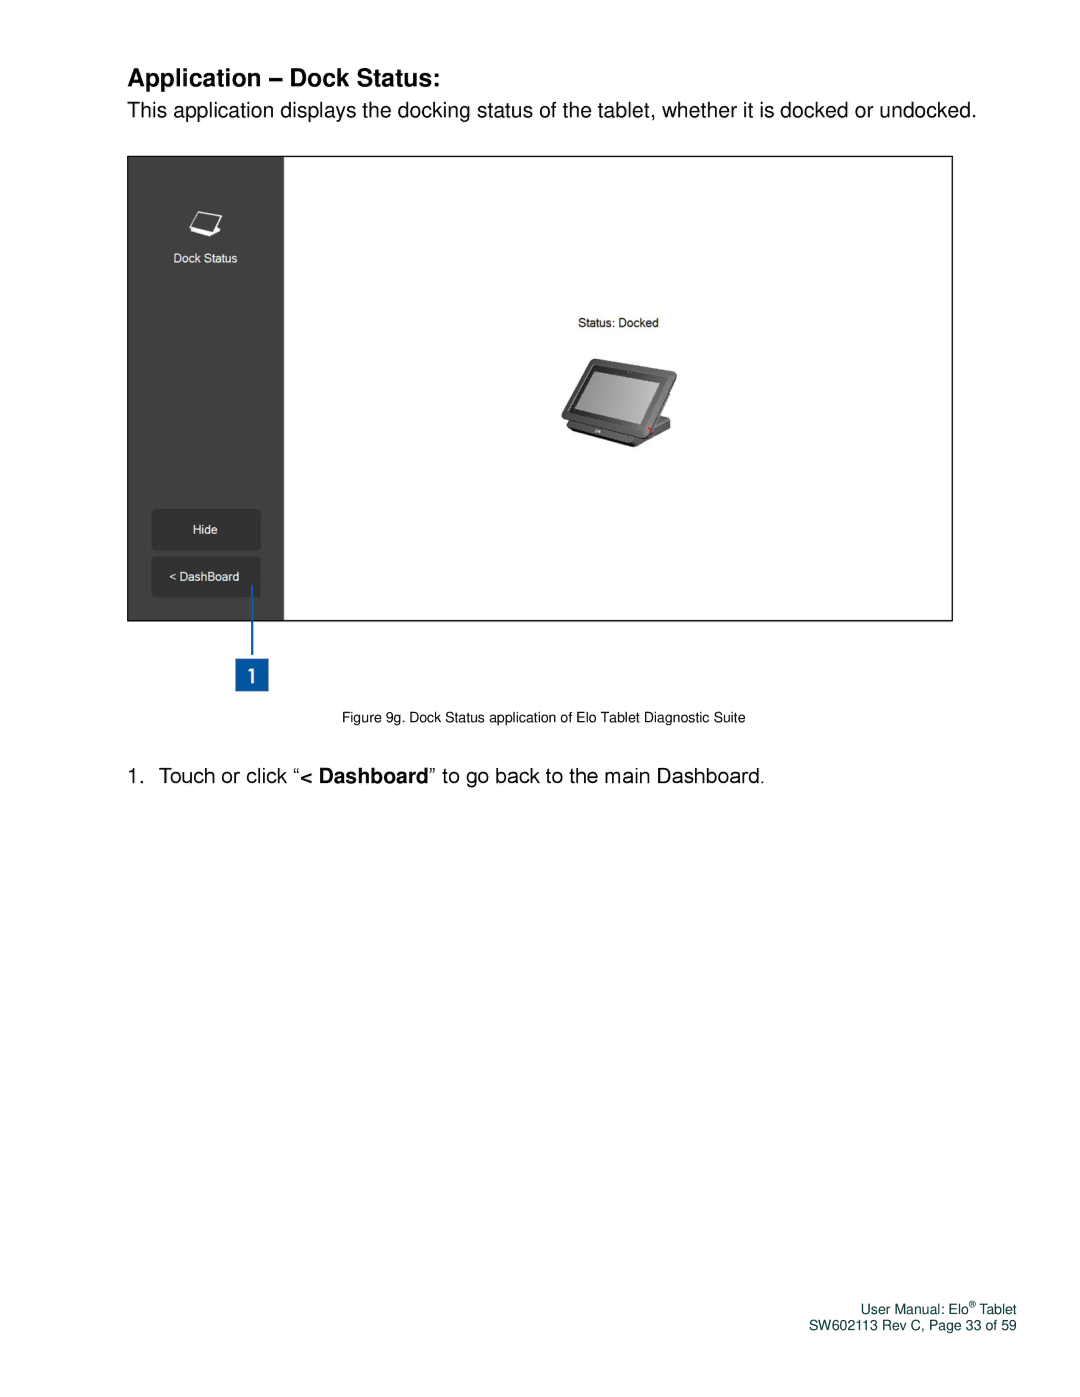 Elo TouchSystems SW602113 manual Application Dock Status, Dock Status application of Elo Tablet Diagnostic Suite 